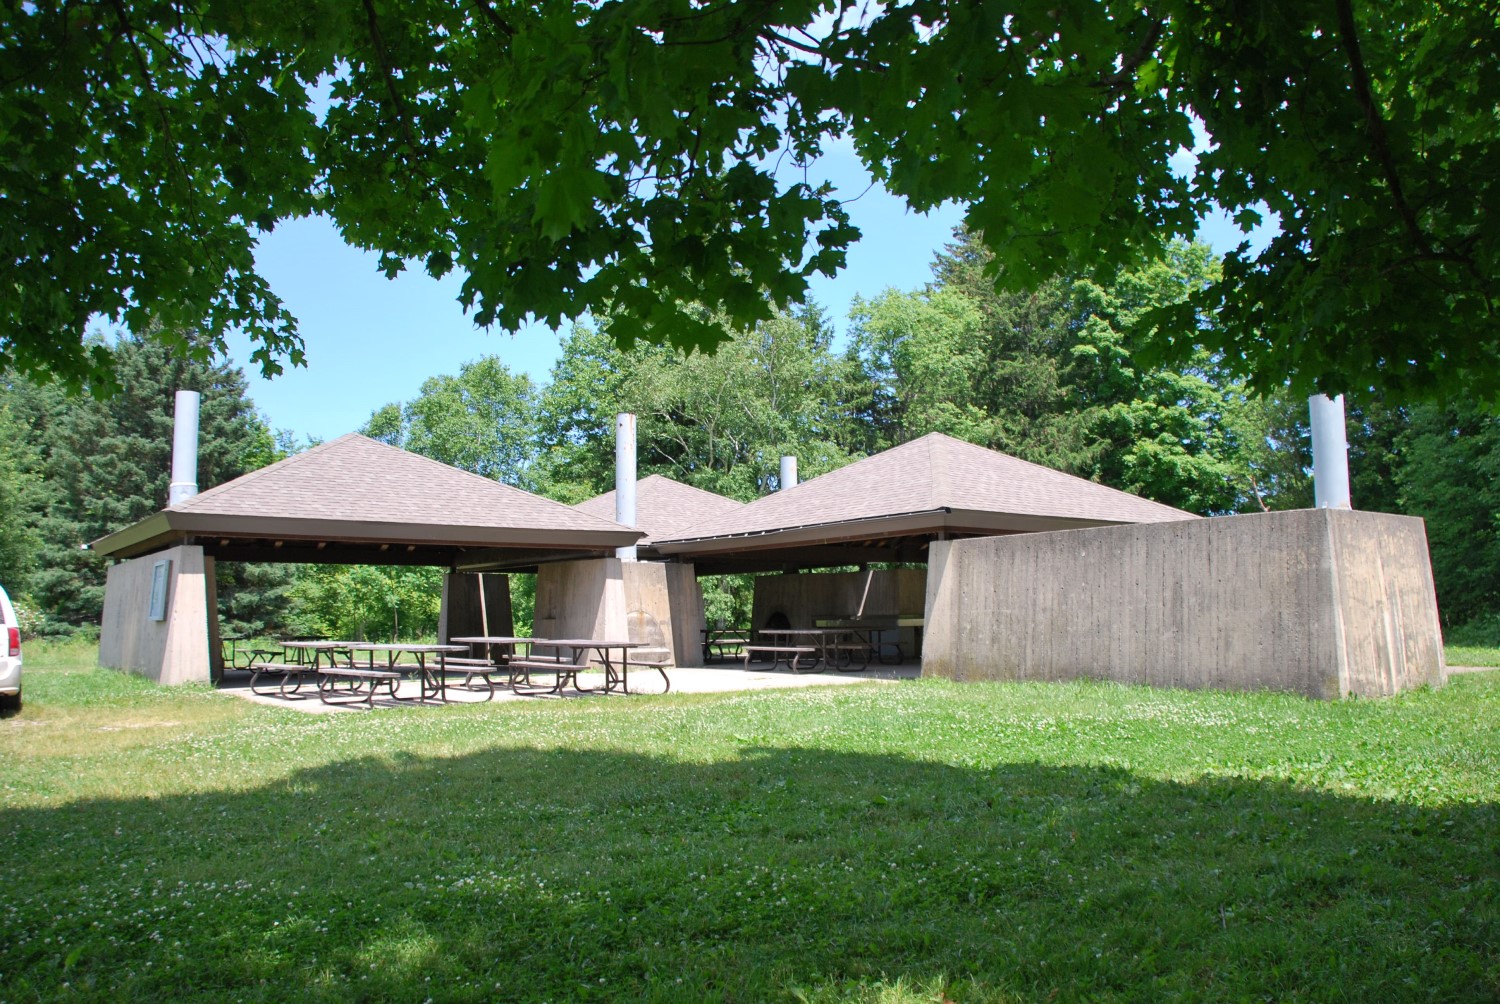 A cement picnic shelter with two pyramid-shaped roofs on top. The shelter is set back in a grassy field.